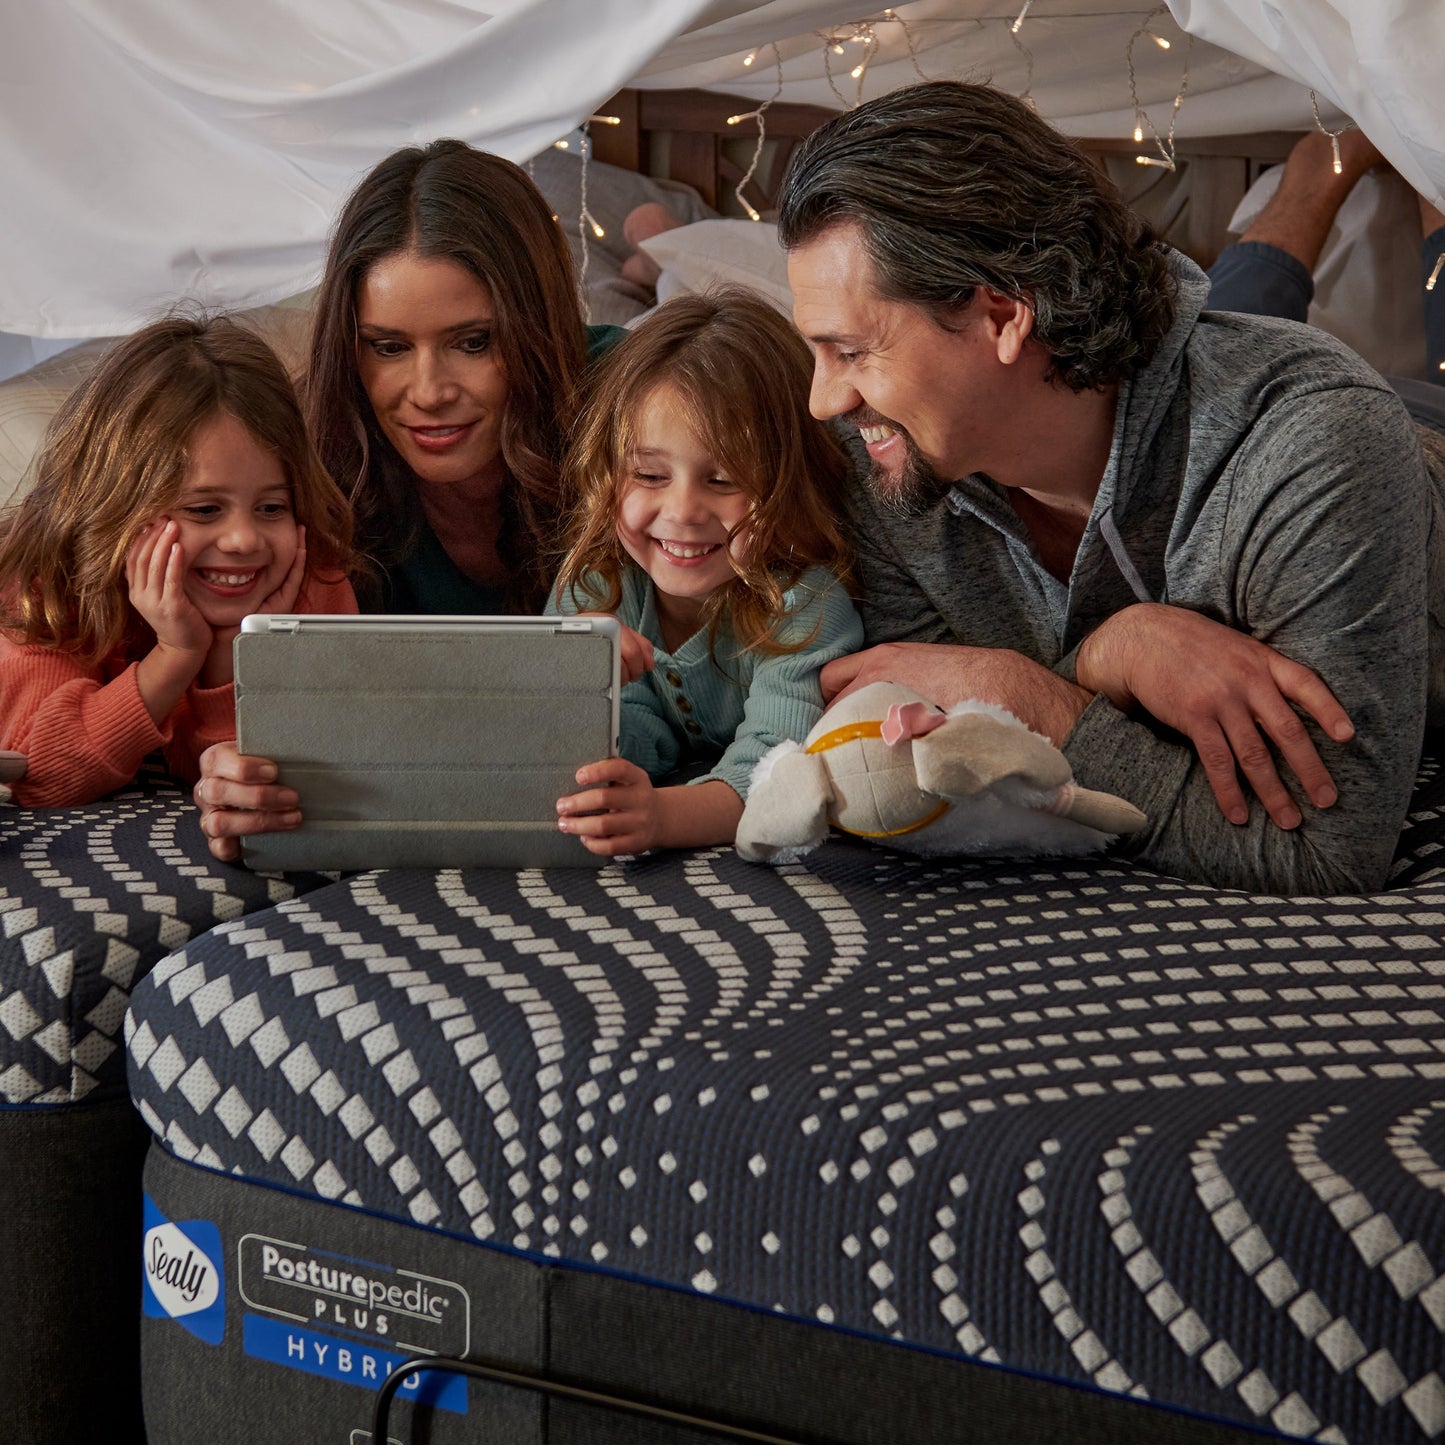 Family Using Tablet On Sealy High Point Soft Hybrid Mattress In Bedroom